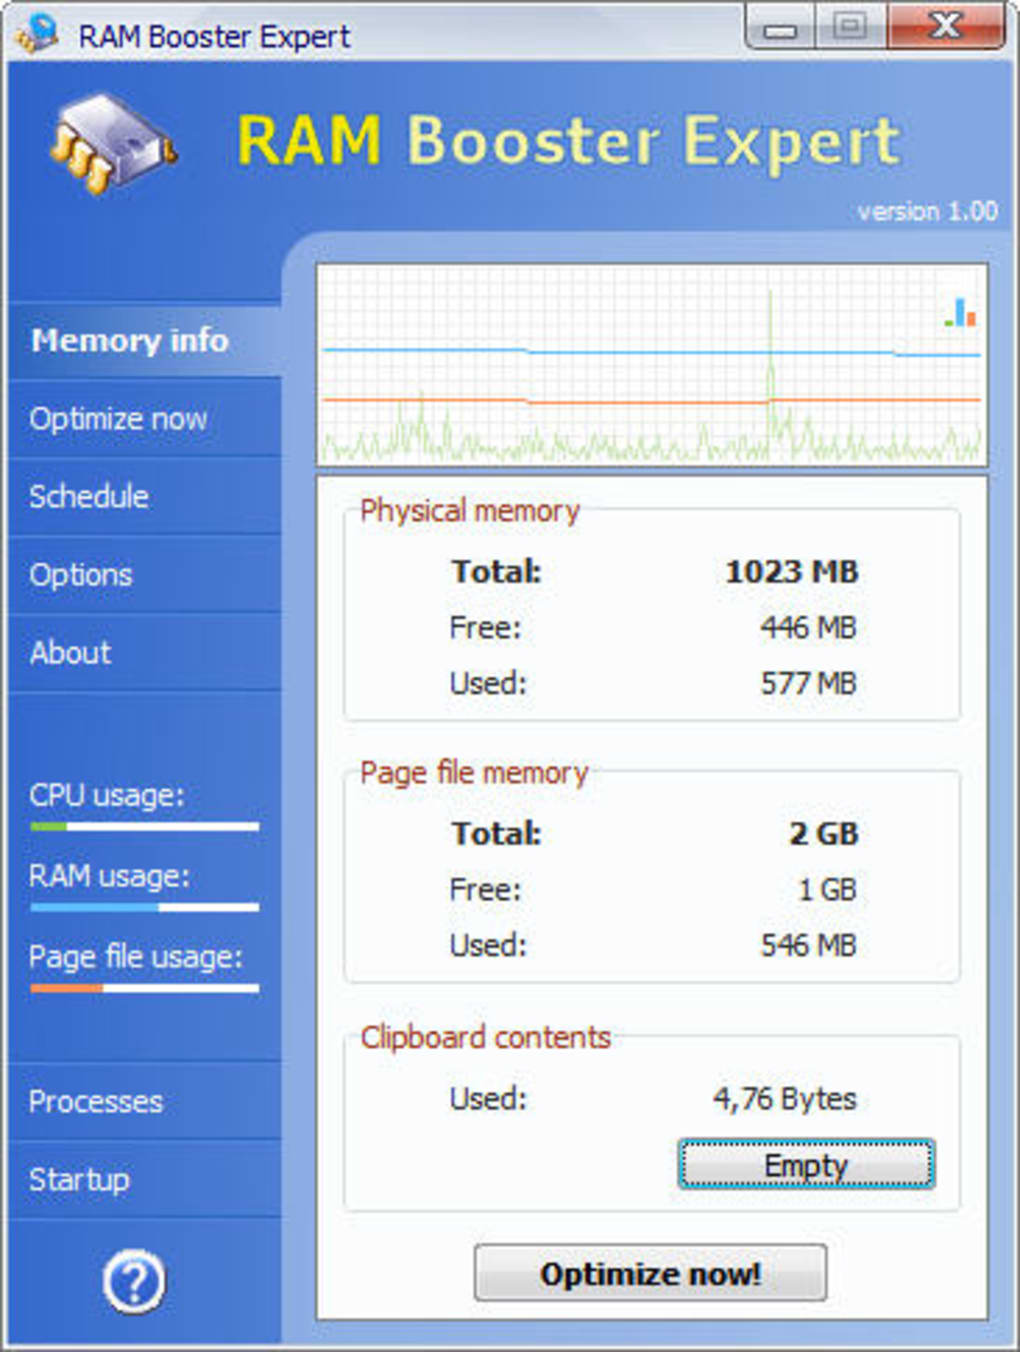 Chris-PC RAM Booster 7.06.30 for windows instal free